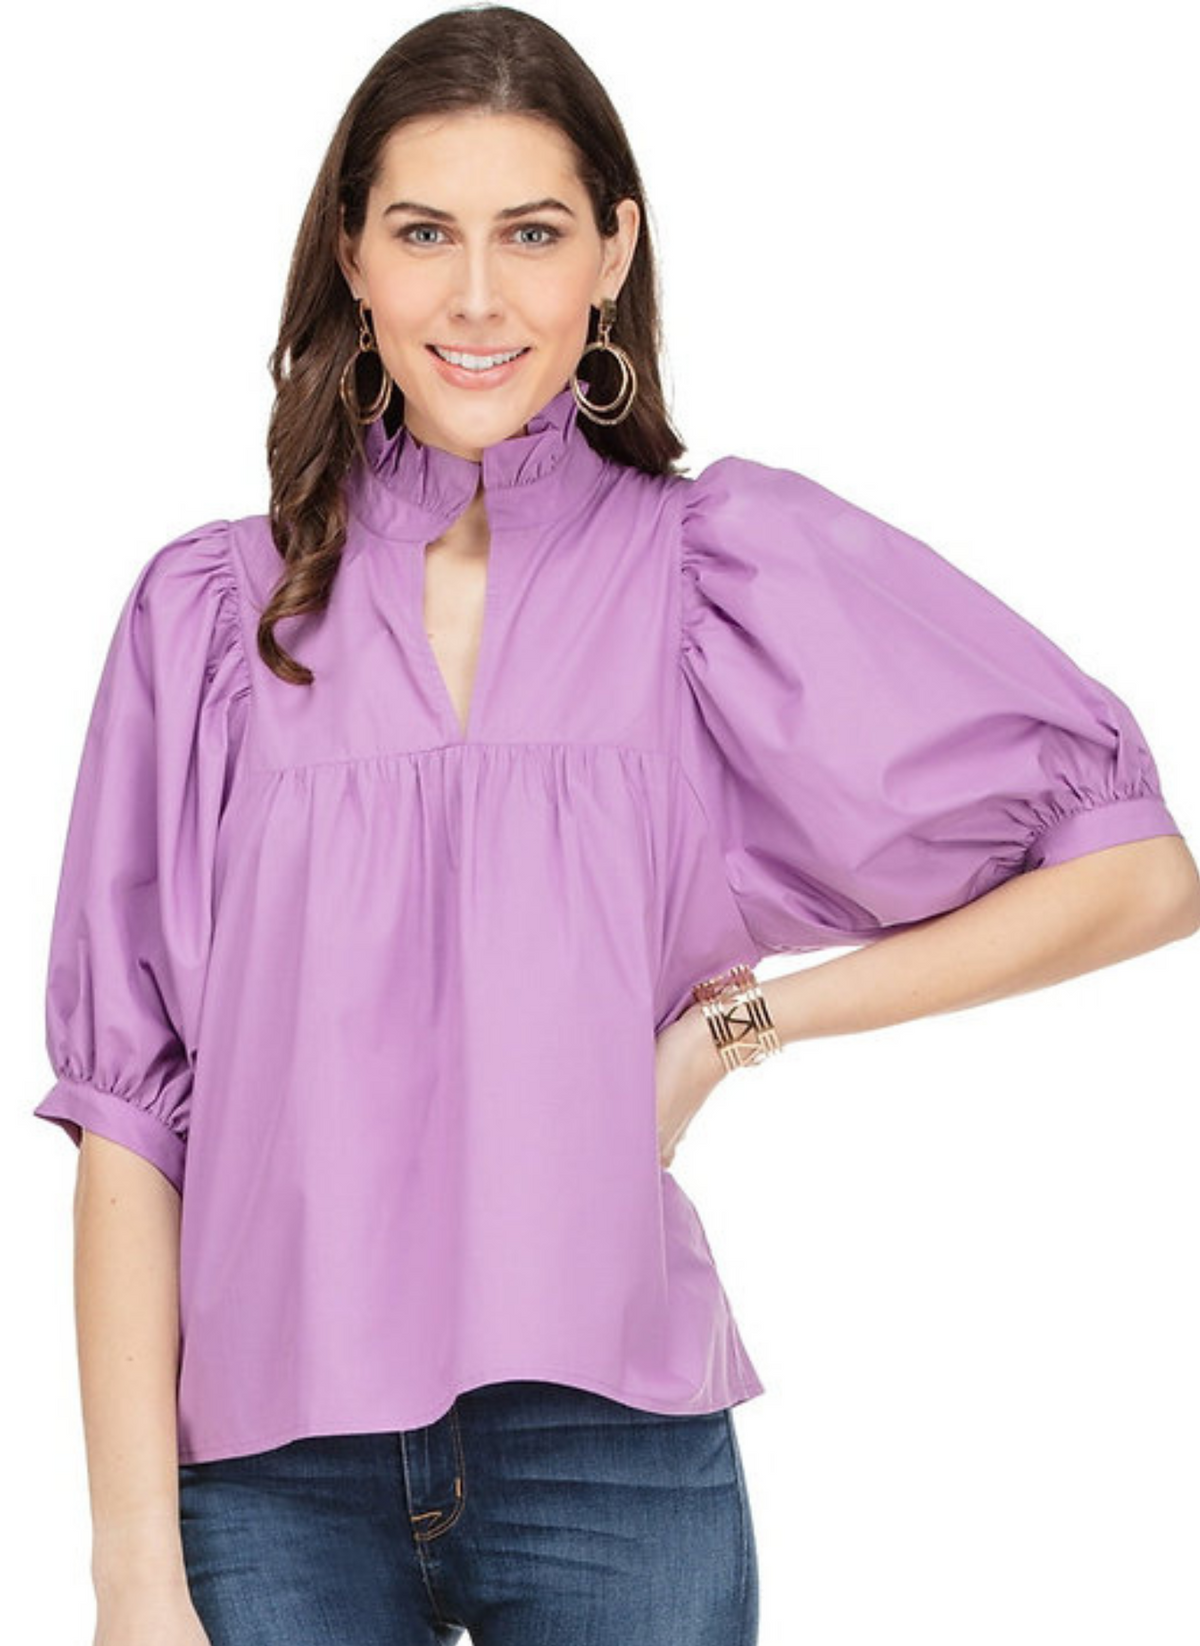 Relaxed High Neck Ruffle Top